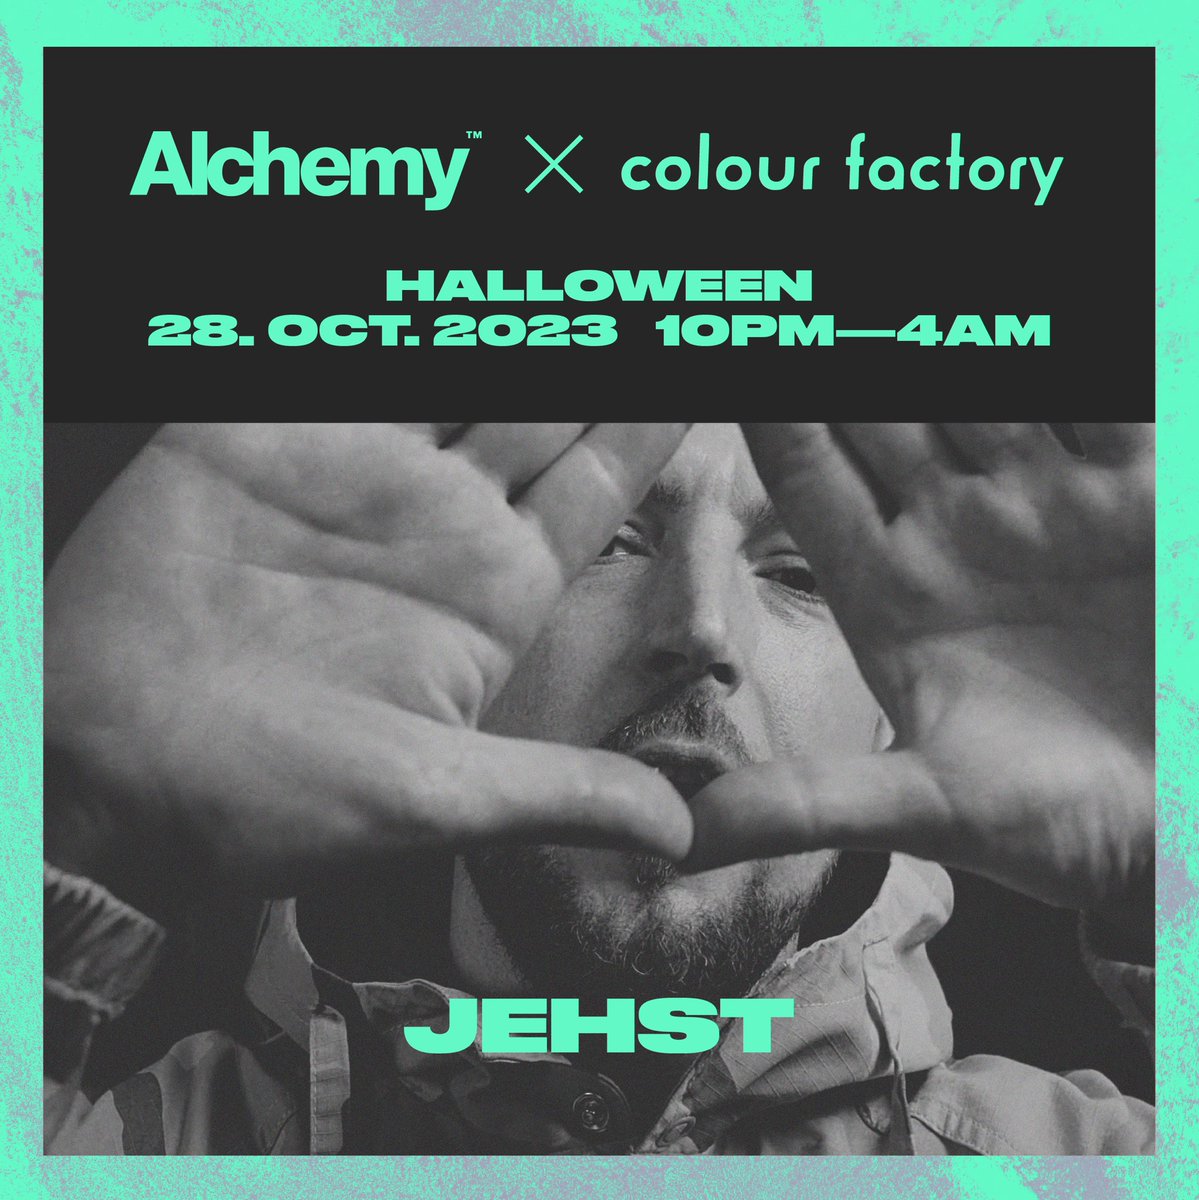 🎃 THIS SATURDAY! 🔜 🗓️ 28TH OCTOBER 2023 🎭 @Alchemy_LDN x #ColourFactory 🎵 @jehstofficial @DJ_AyyDen @EastmansoundUk @fabiodnb @watchtheride_ @BasslineMC @CleveWatkiss @mcmoose600 + more! 📌 #HackneyWick #London 🎫 TICKETS ➡️ linktr.ee/jehstofficial